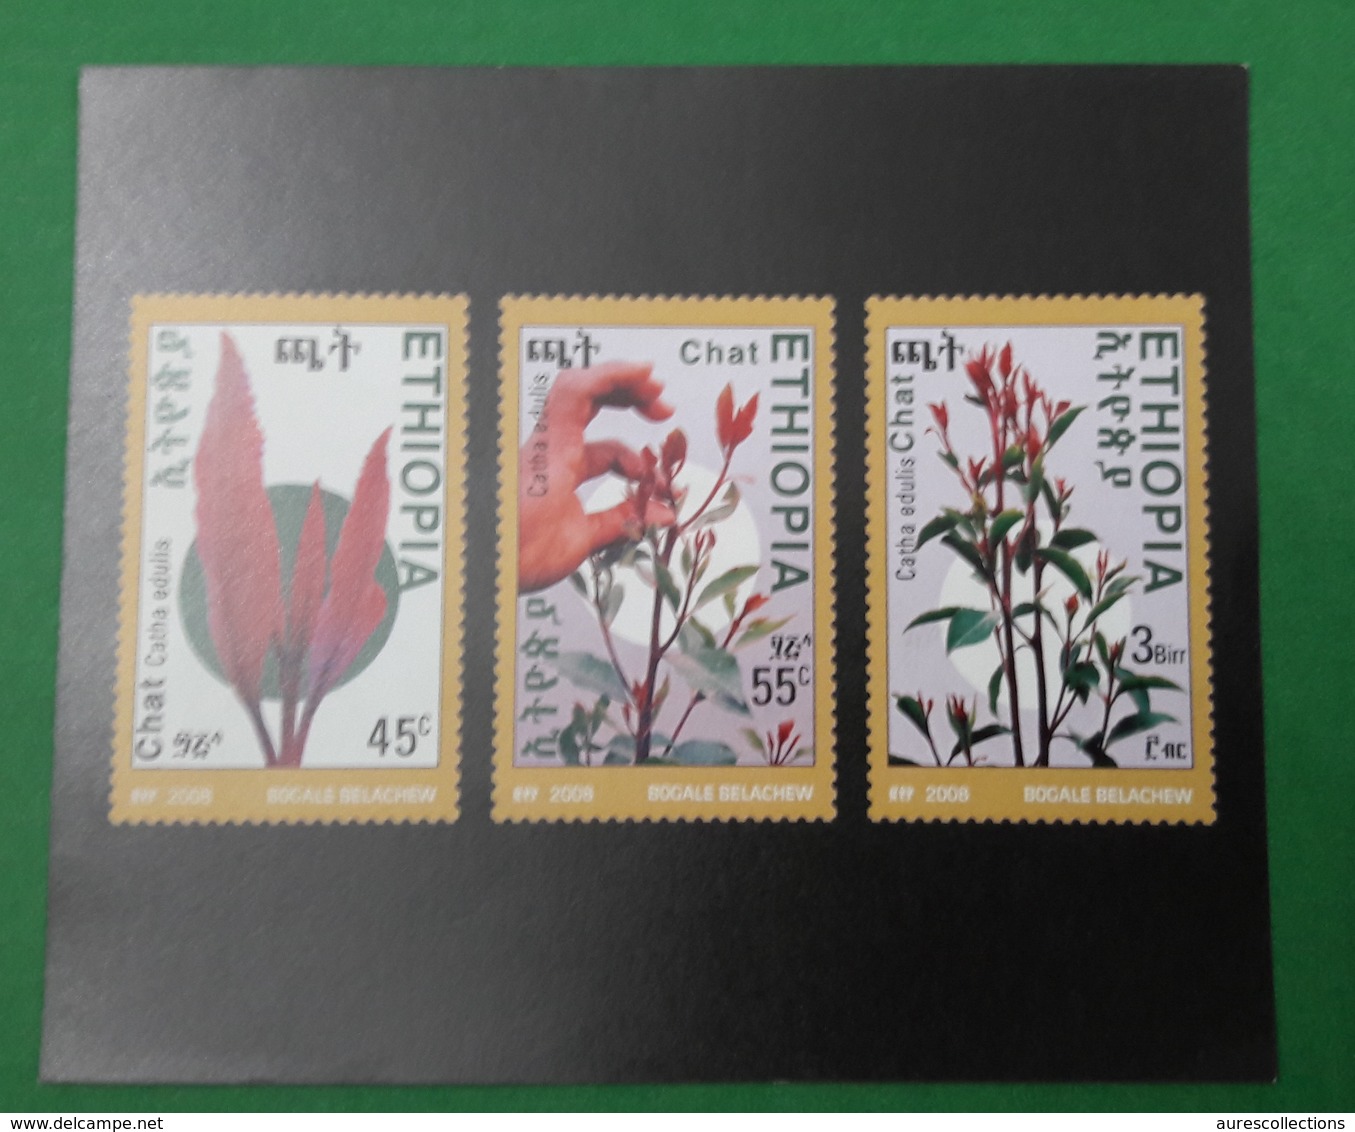 ETHIOPIA ETHIOPIE ¤ DELUXE PROOF EPREUVE DE LUXE ¤ 2008 KHAT CHAT SHEWING AND ITS CONSEQUENCES PLANT PLANTS ¤ ULTRA RARE - Ethiopie